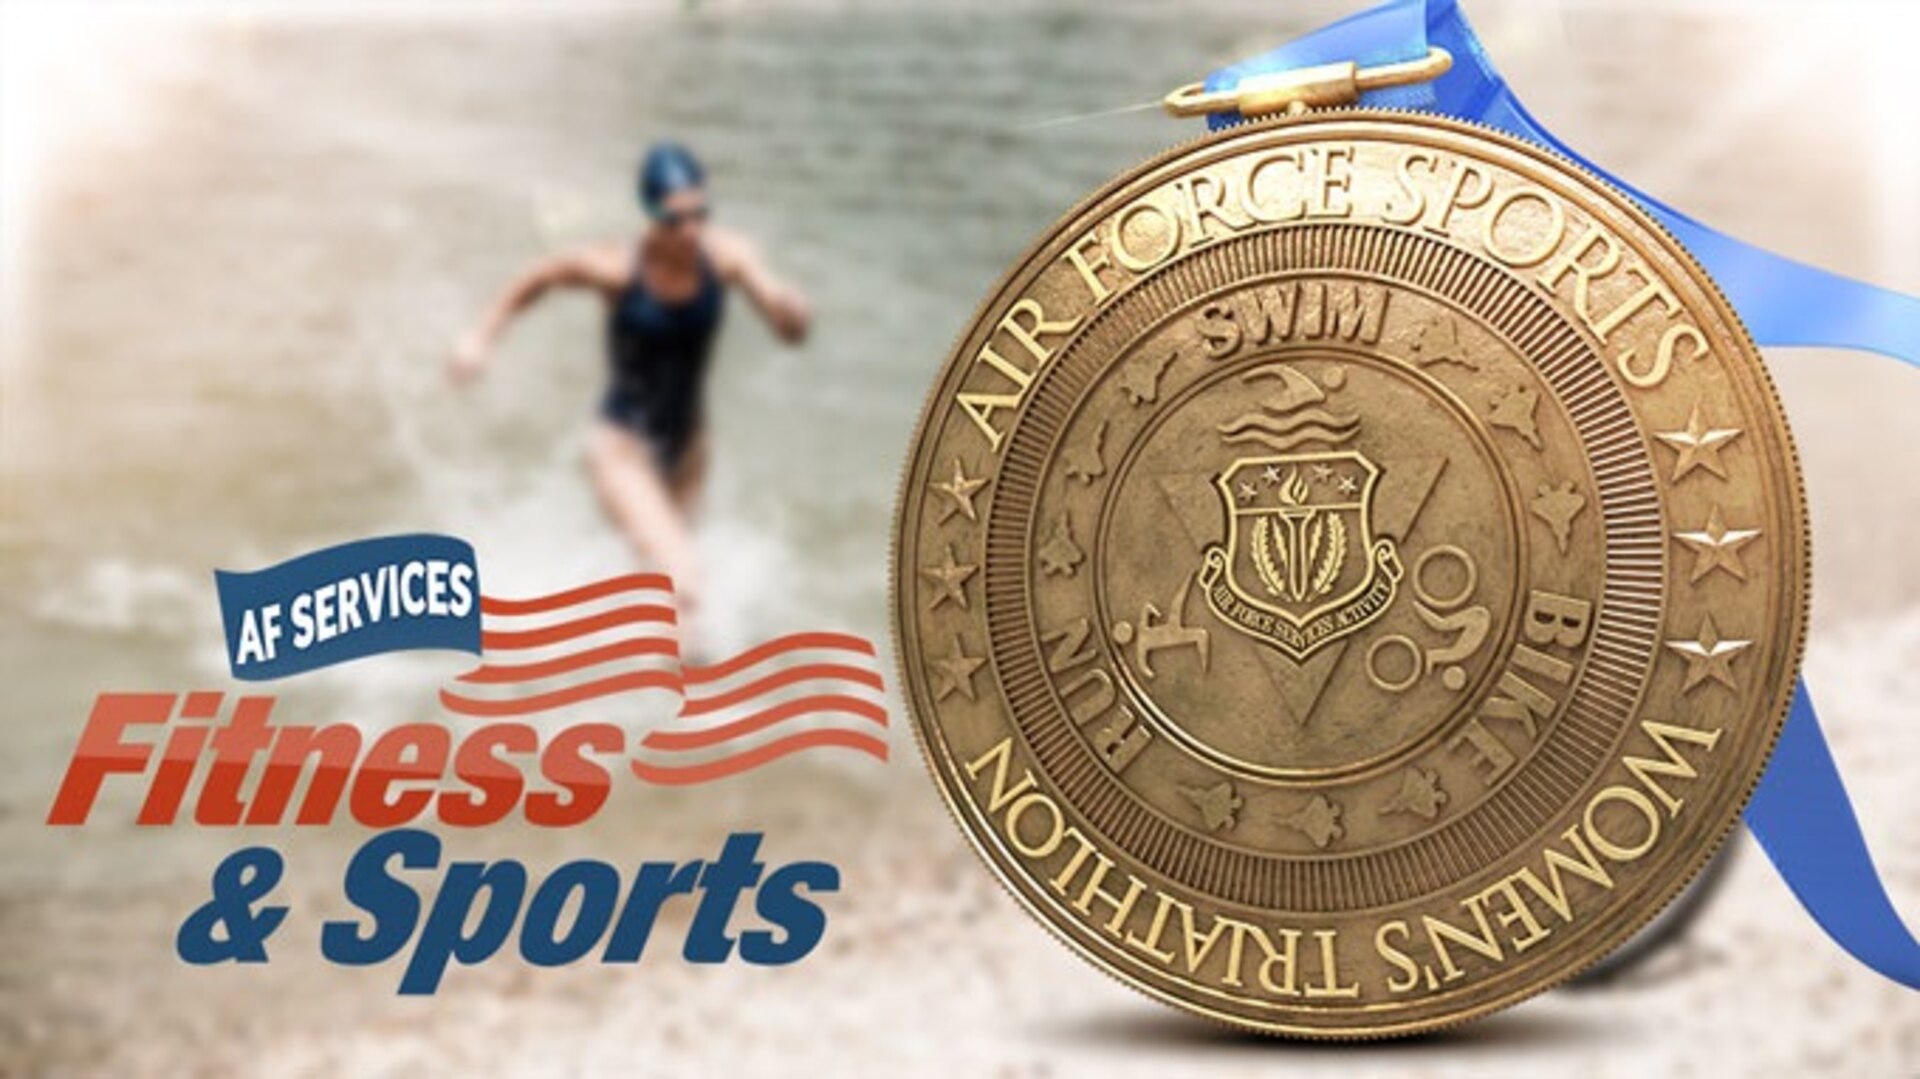 The Air Force is looking for men and women for the 2019 Armed Forces Triathlon in Ventura County, California, June 19-23.